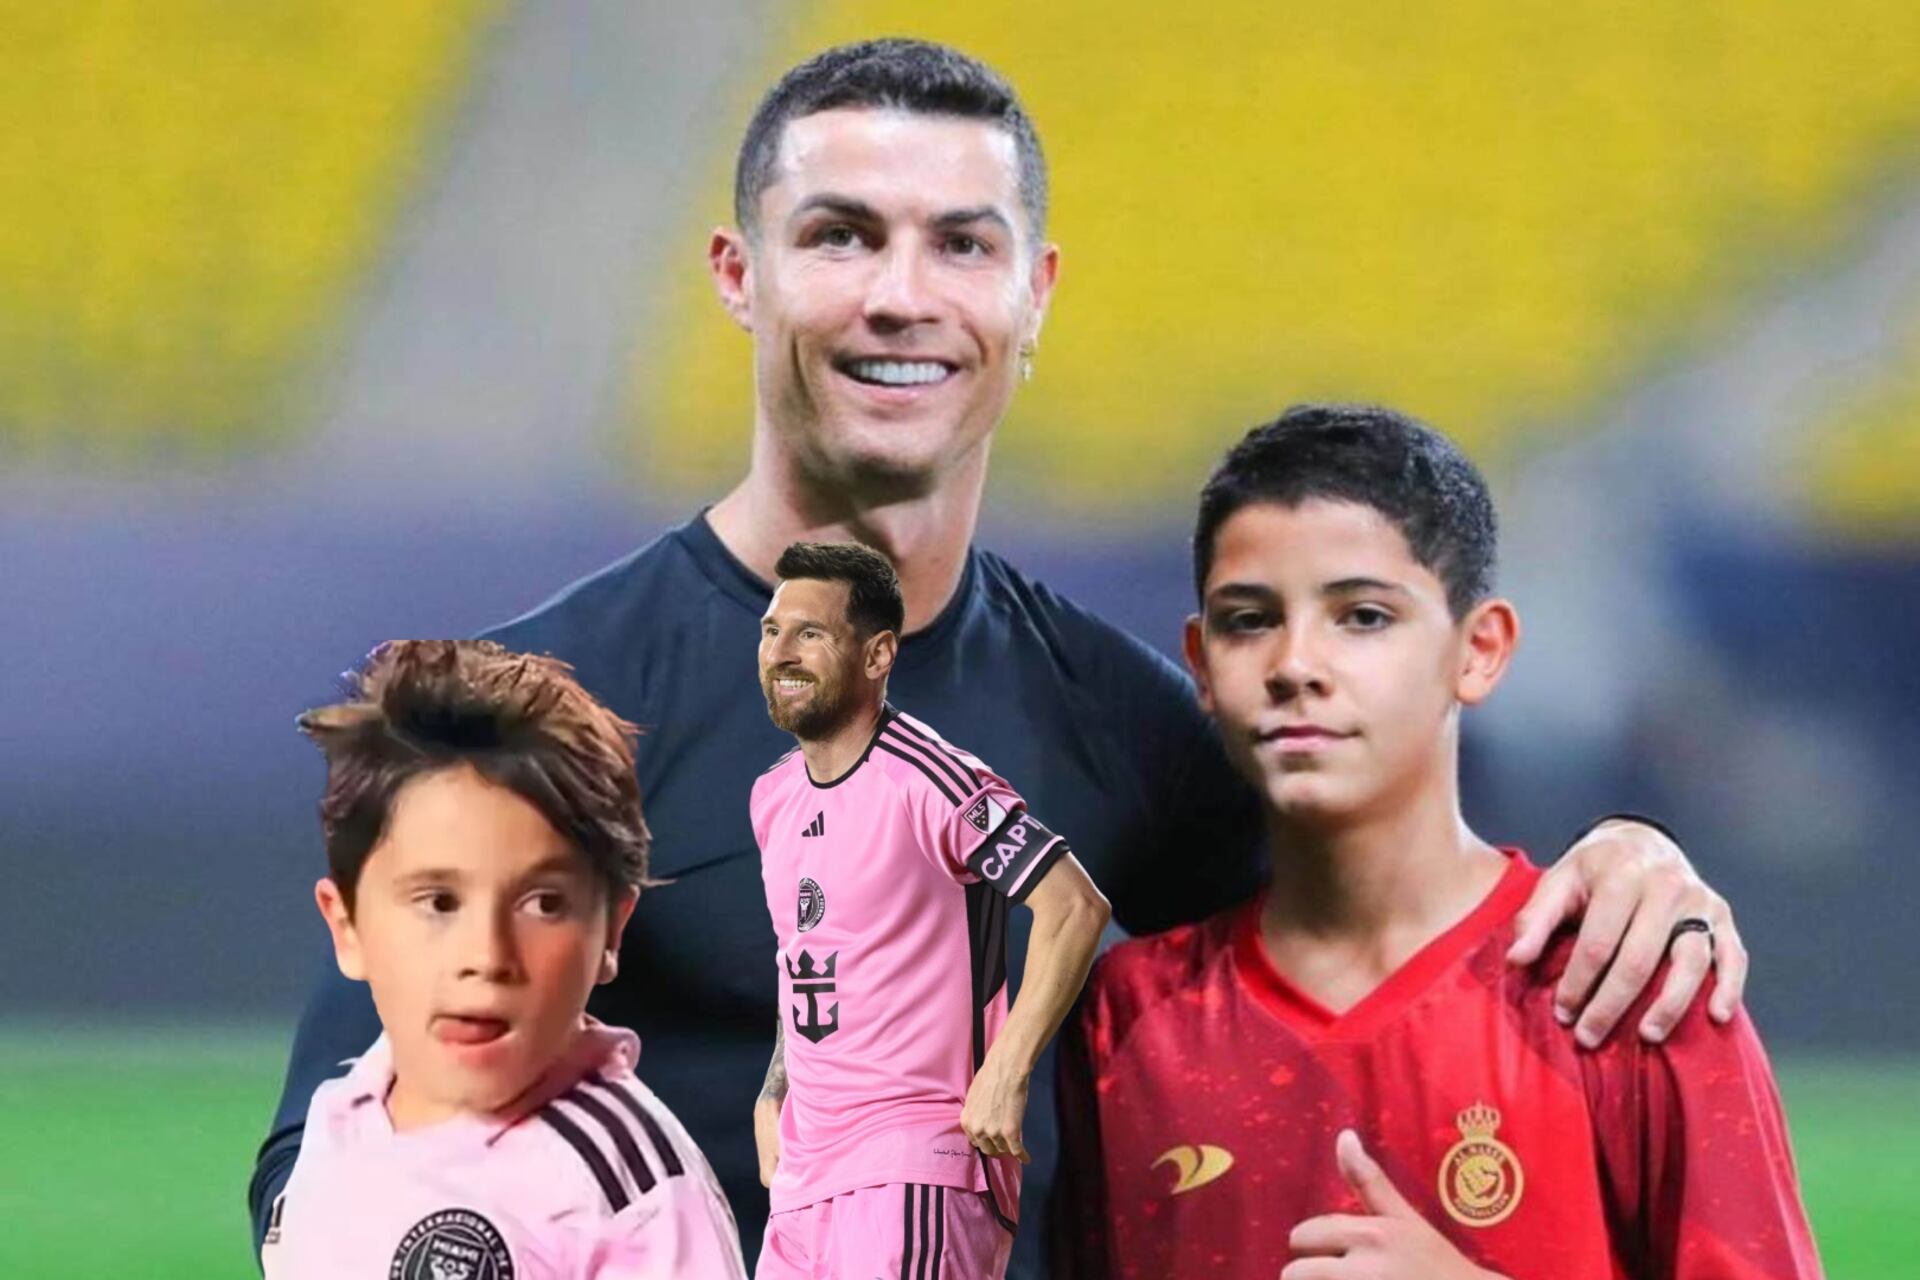 While Cristiano Jr goes with CR7 to the events in Saudi, what Messi’s son does after his father’s game